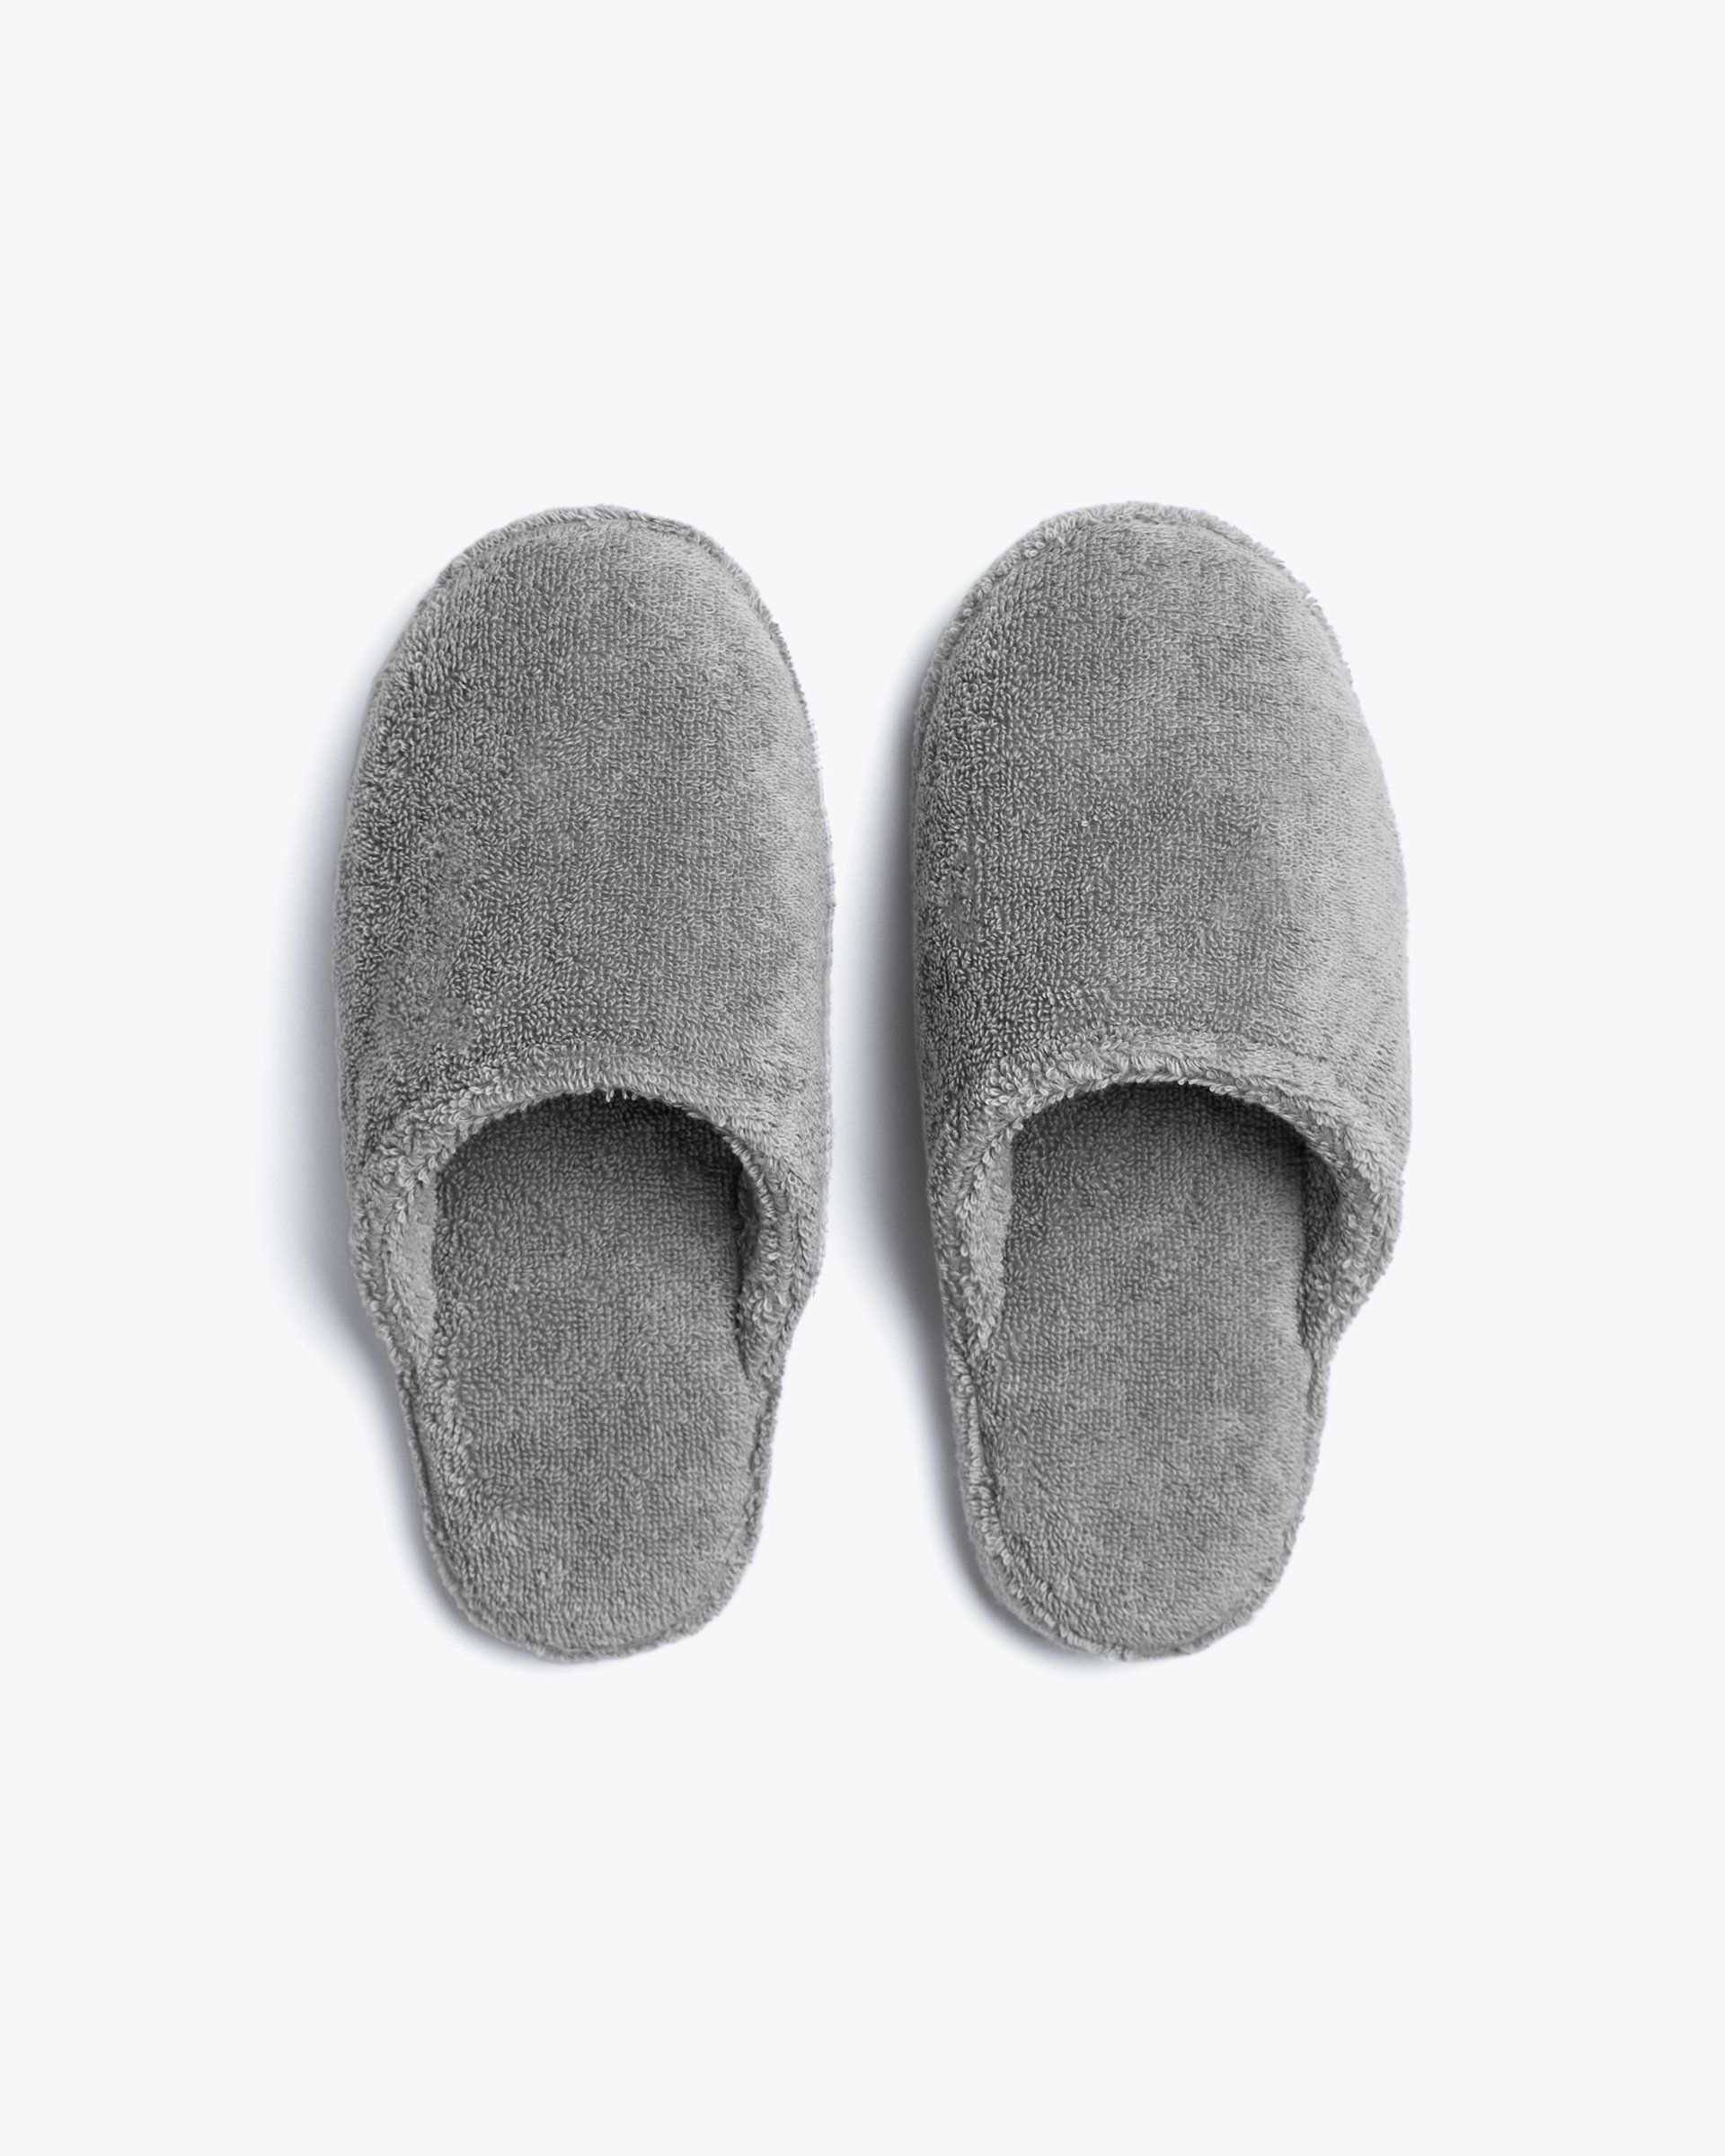 nice slippers for mom